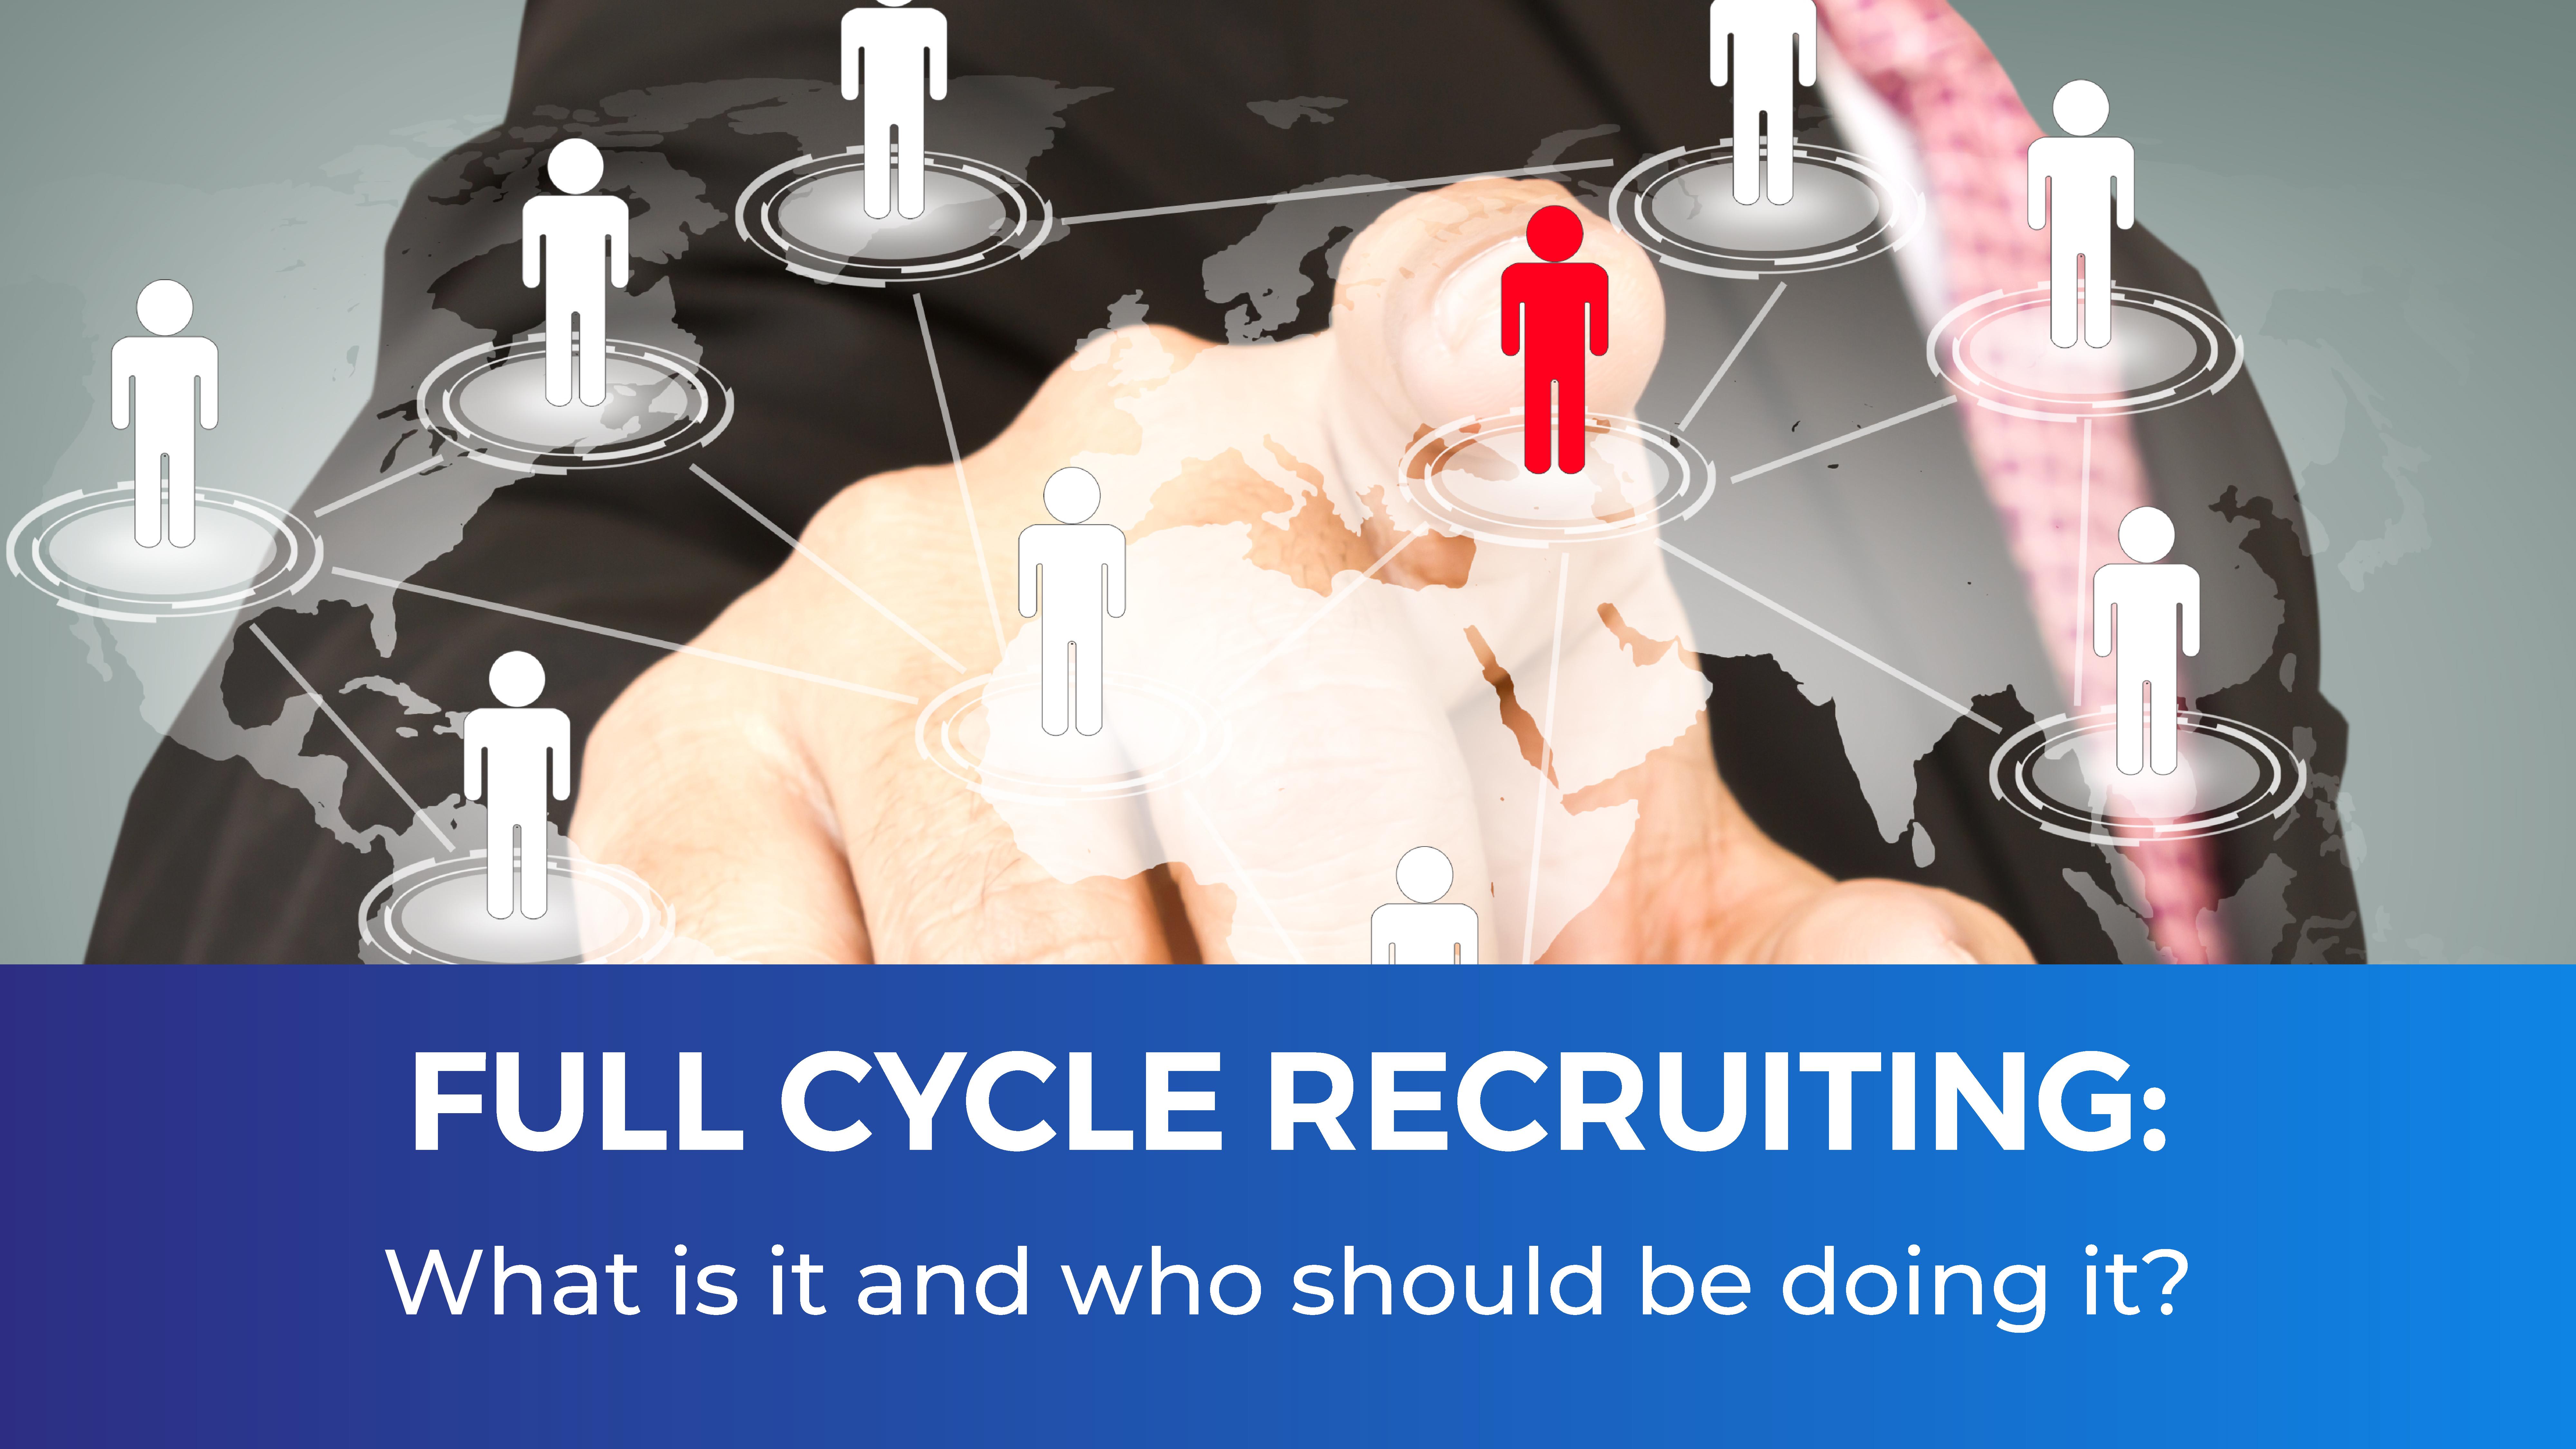 full-cycle-recruiting:-what-is-it-and-who-should-be-doing-it